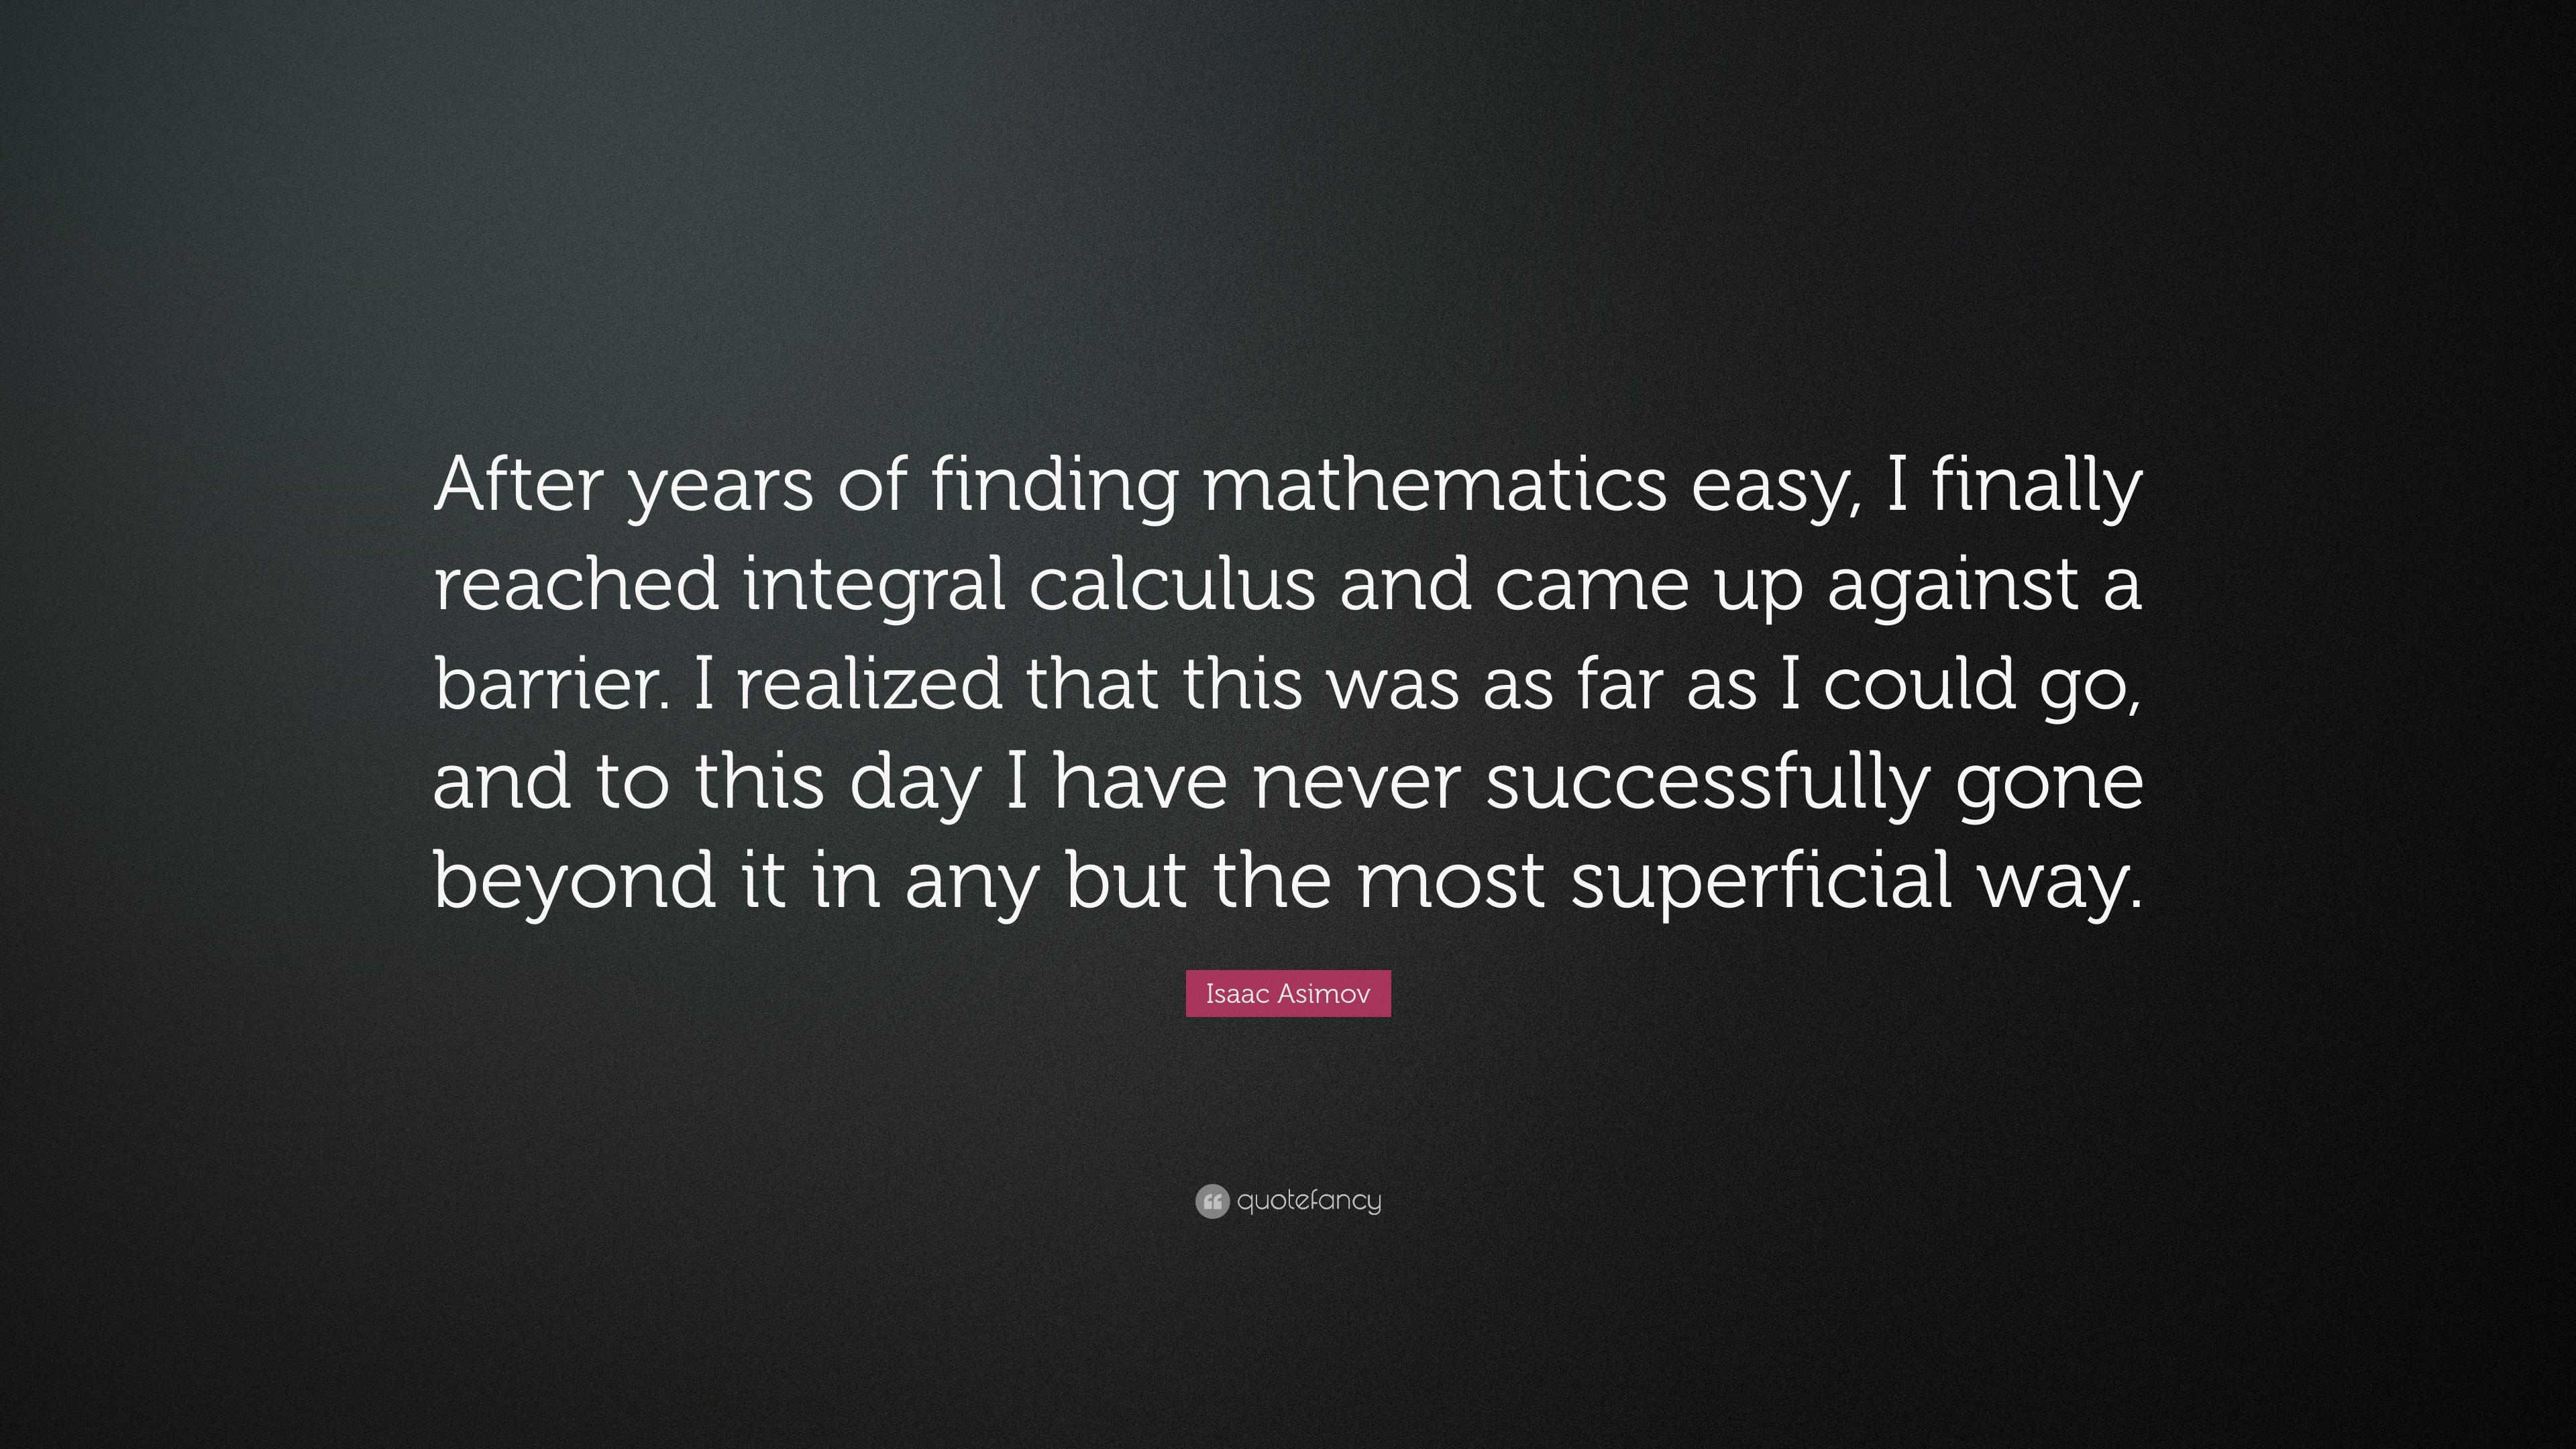 Isaac Asimov Quote: “After years of finding mathematics easy